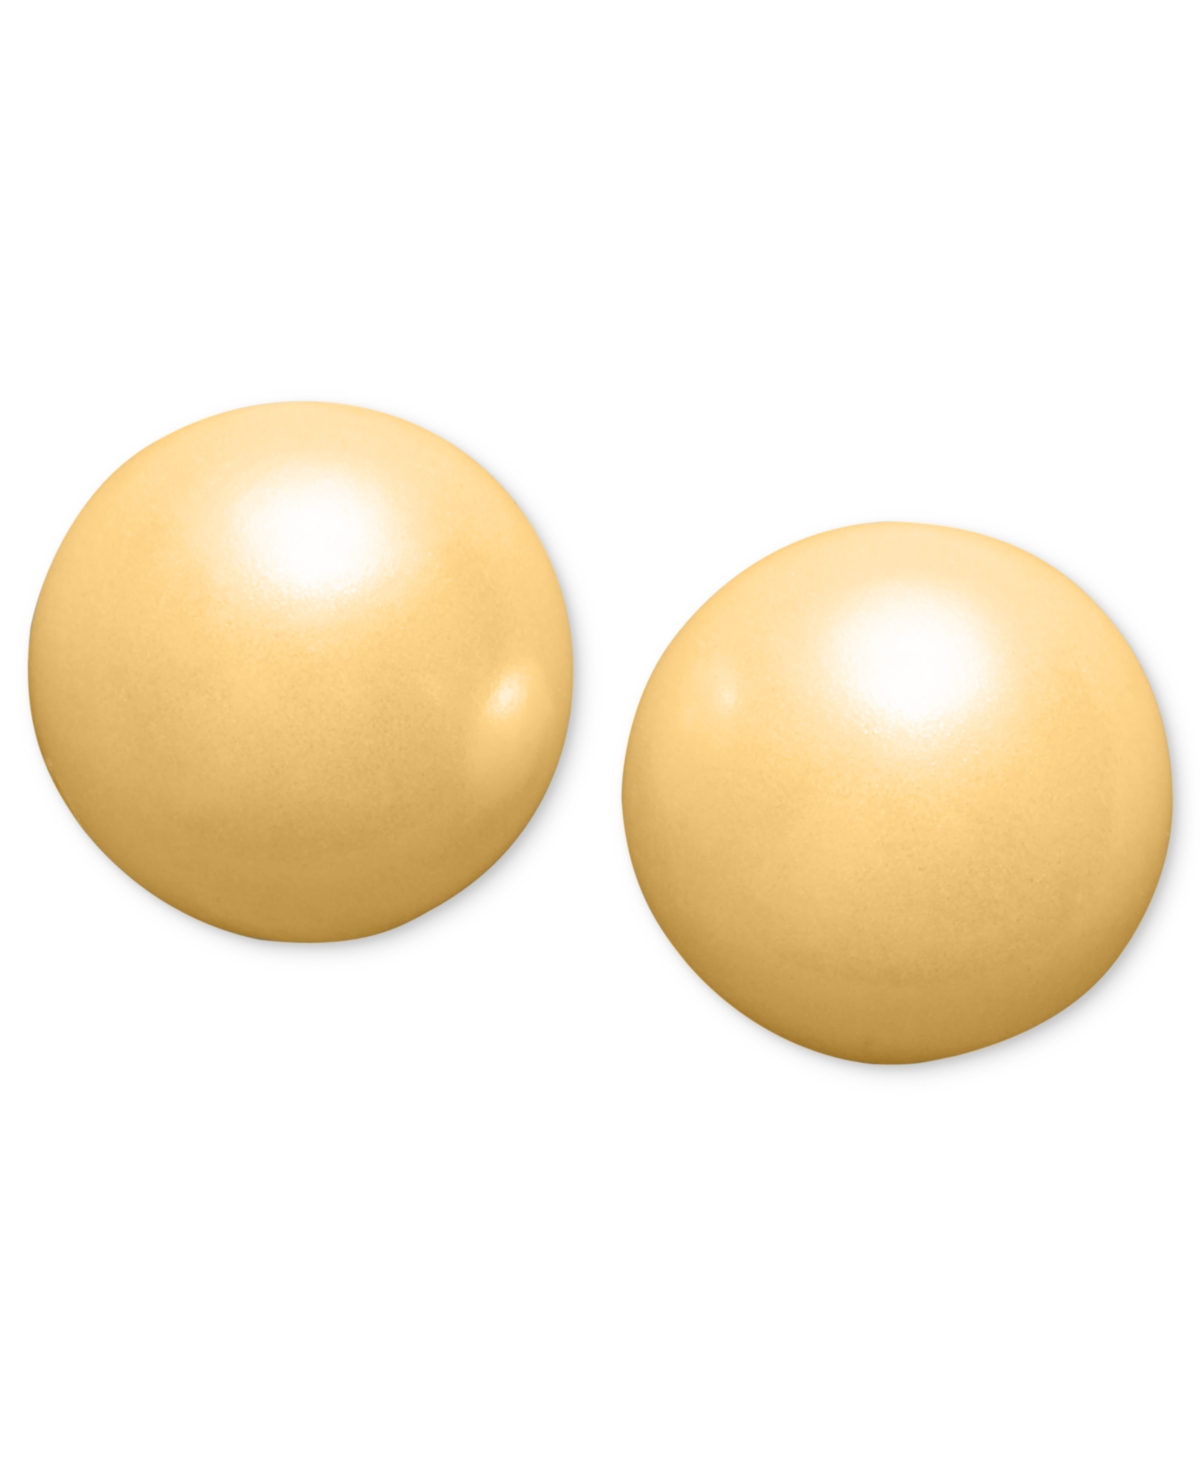 Silver-Tone Imitation Pearl (6mm) Stud Earrings, Created for Macy's - Gold